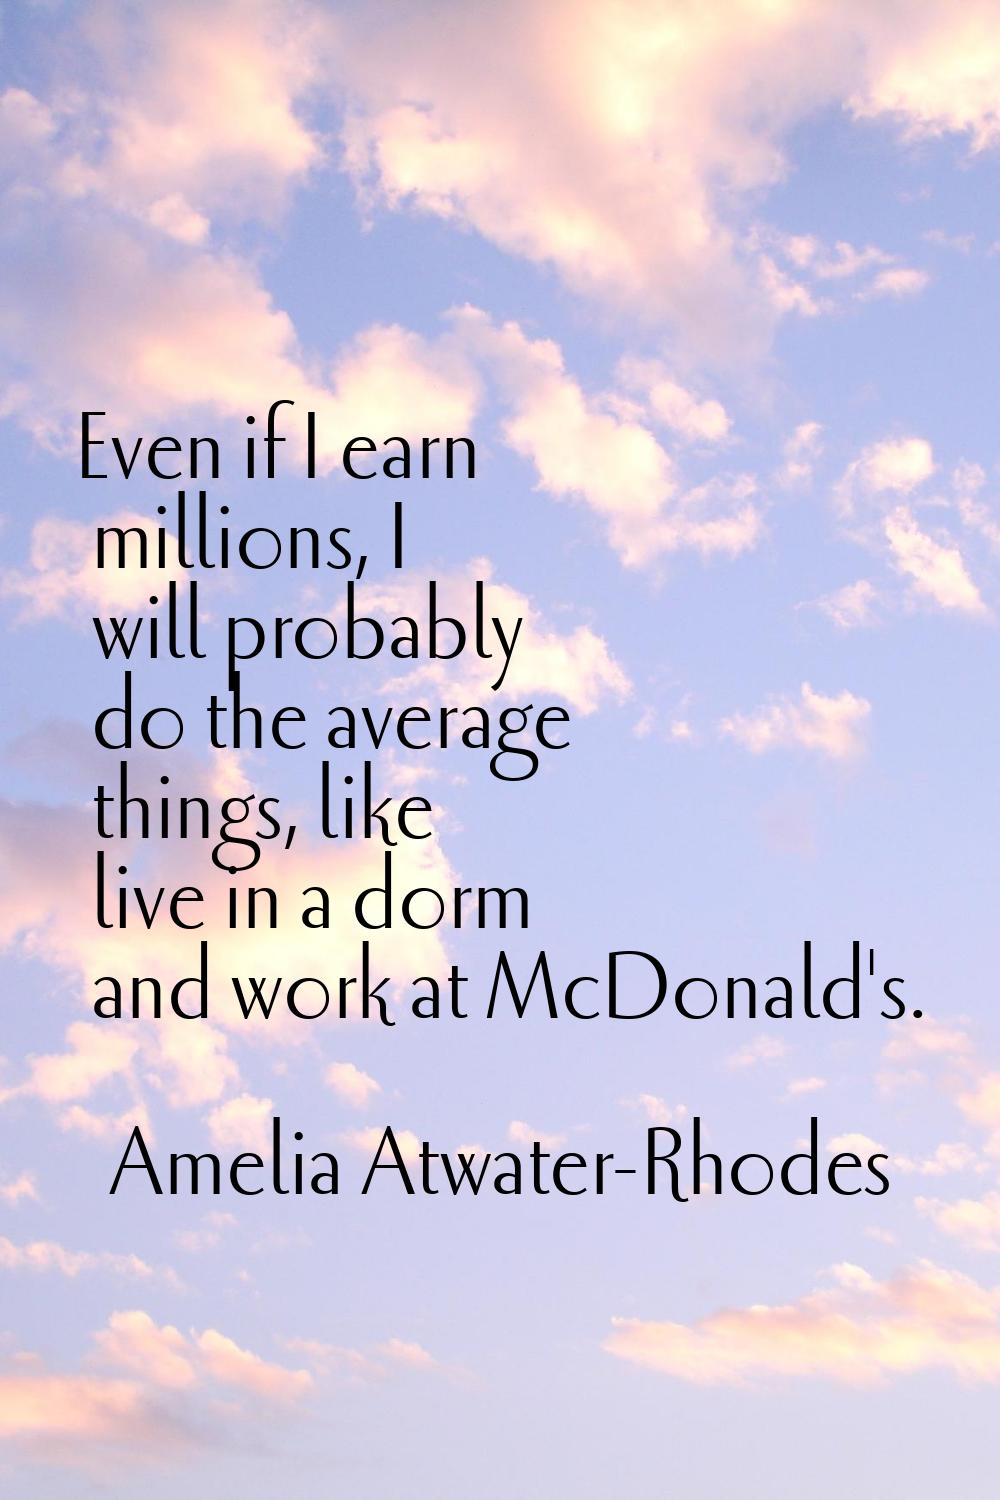 Even if I earn millions, I will probably do the average things, like live in a dorm and work at McD